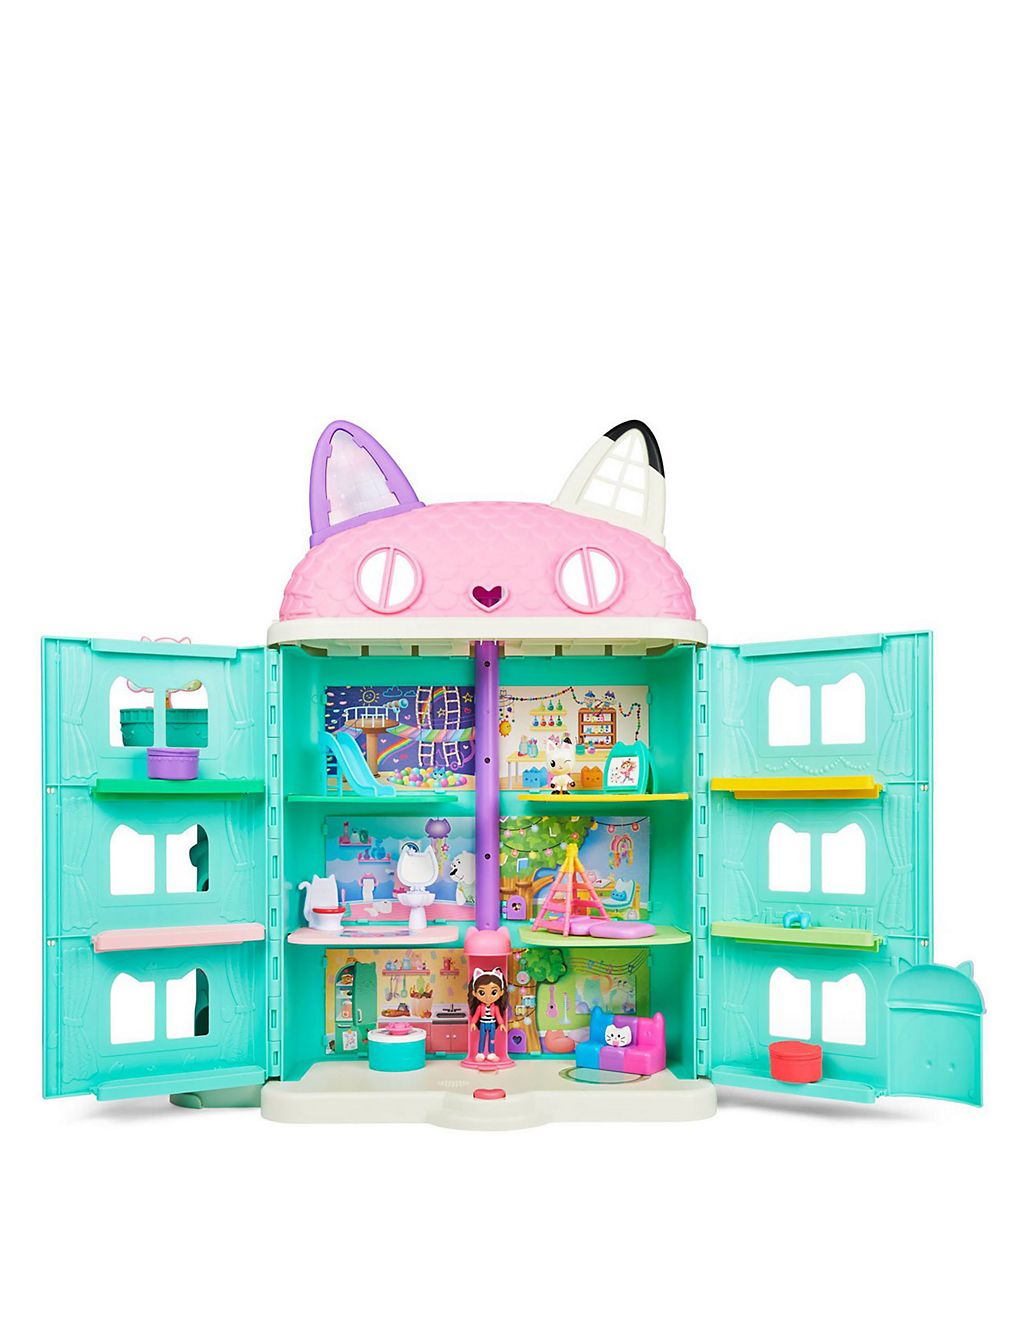 Gabby's Purrfect Dollhouse with Gabby and Pandy Paws Figures (3+ Yrs) 1 of 6